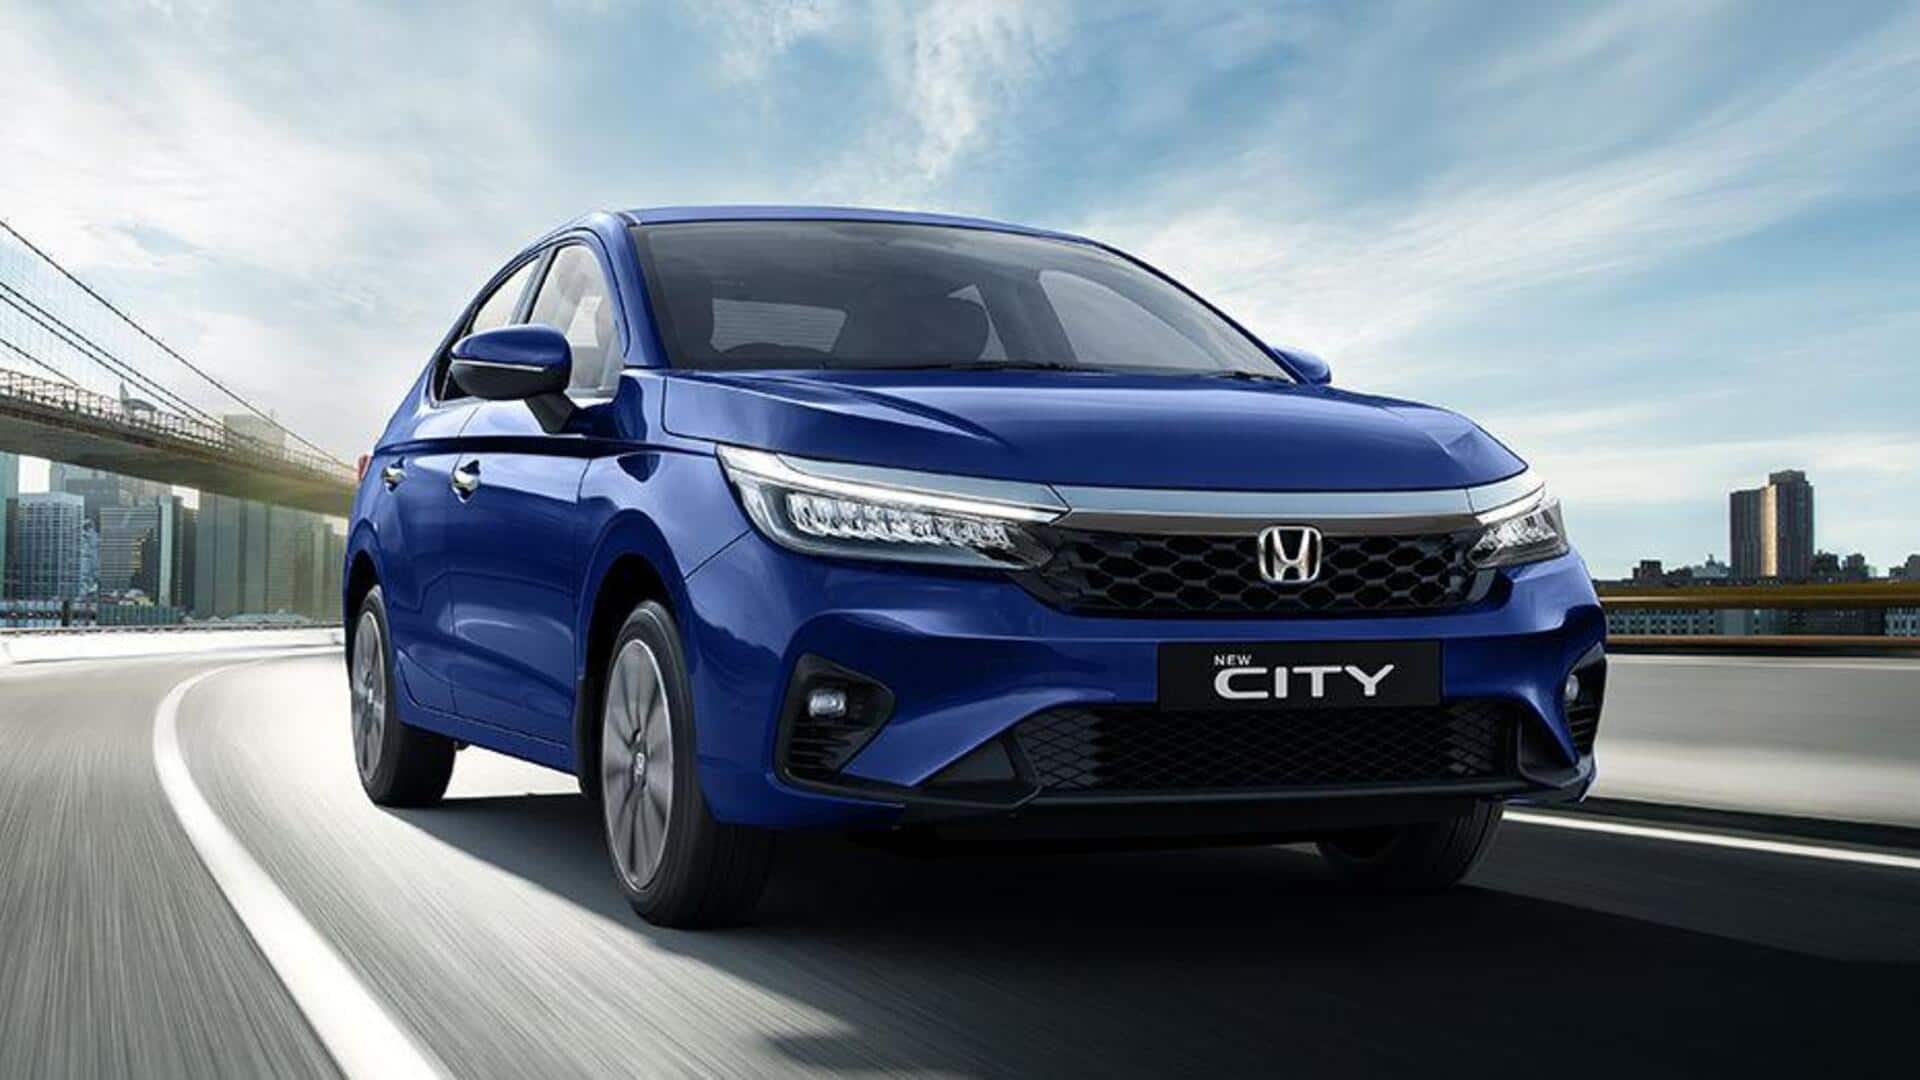 Honda India is offering discounts worth ₹1.15 lakh this month